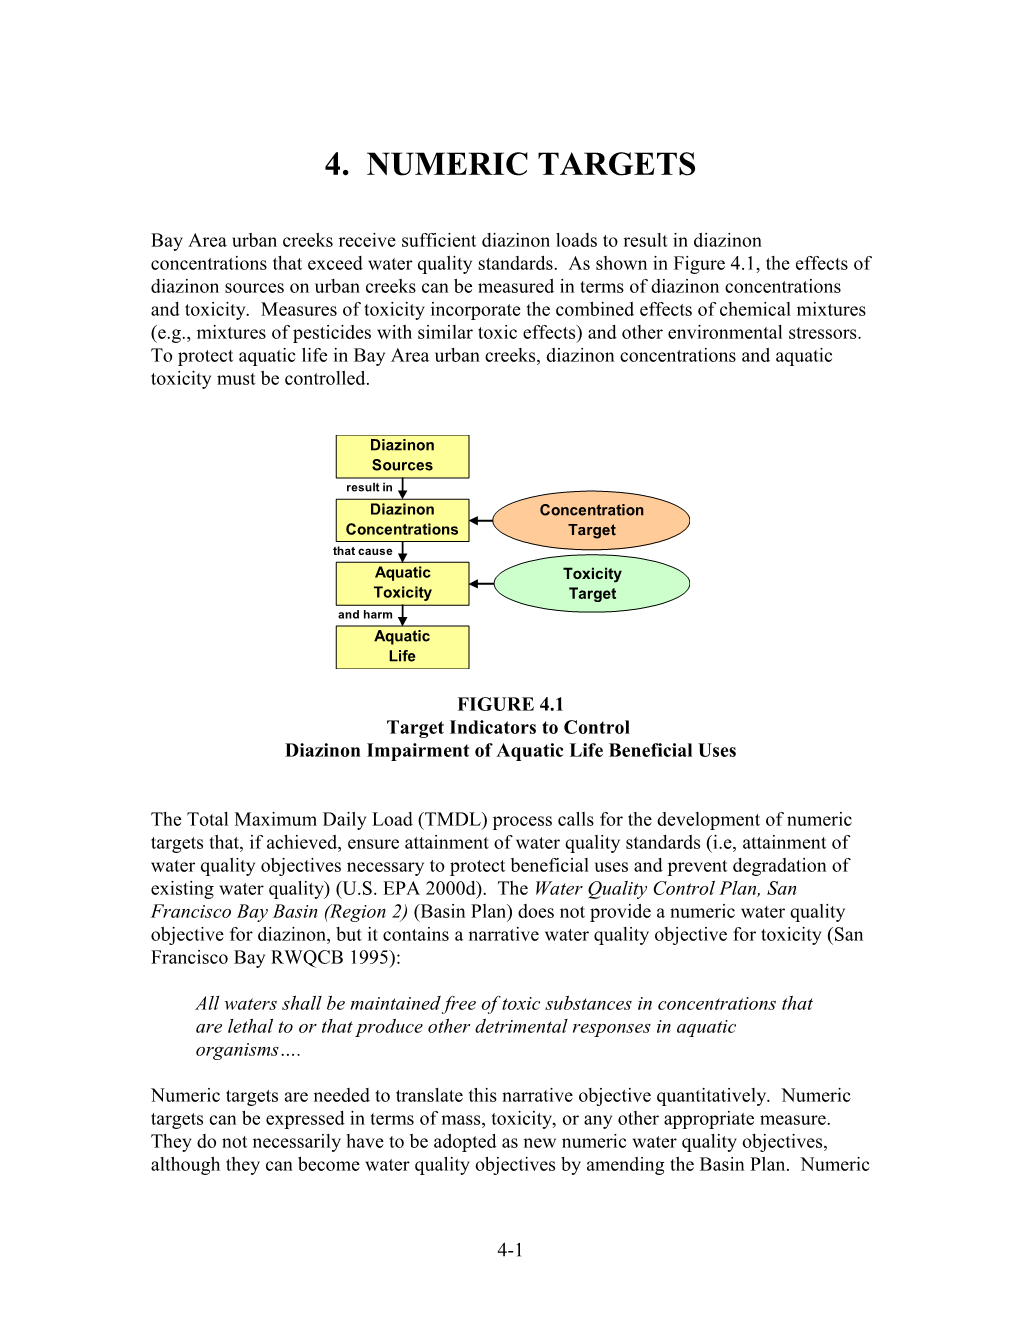 Numeric Targets Are to Be a Surrogate for the Standard and Protecting Beneficial Uses